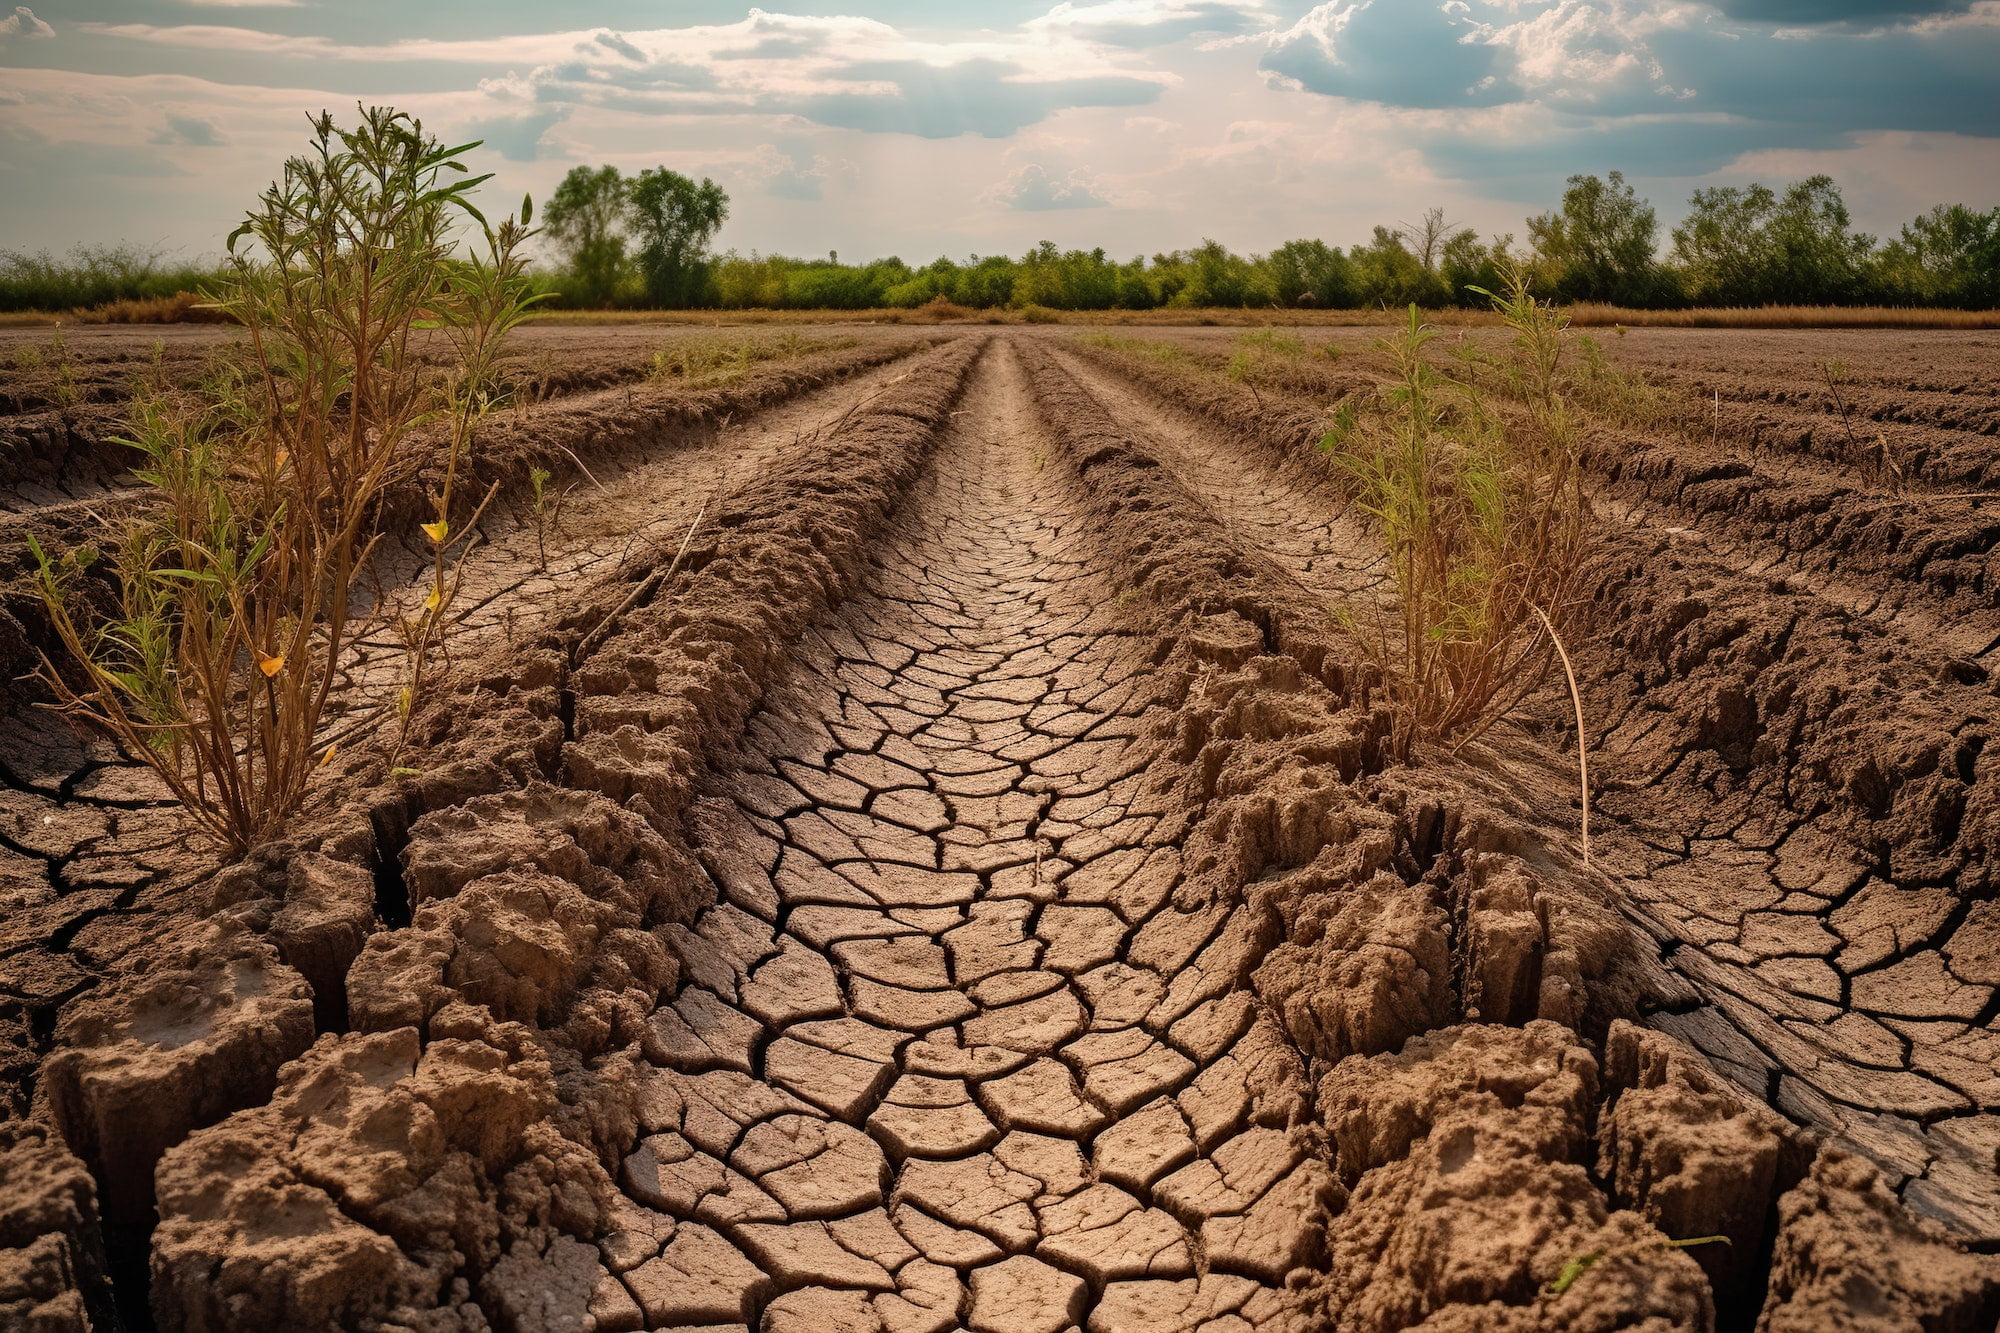 Life Finds a Way: Photo of Grass Pushing Through Dry Earth in a Barren Field